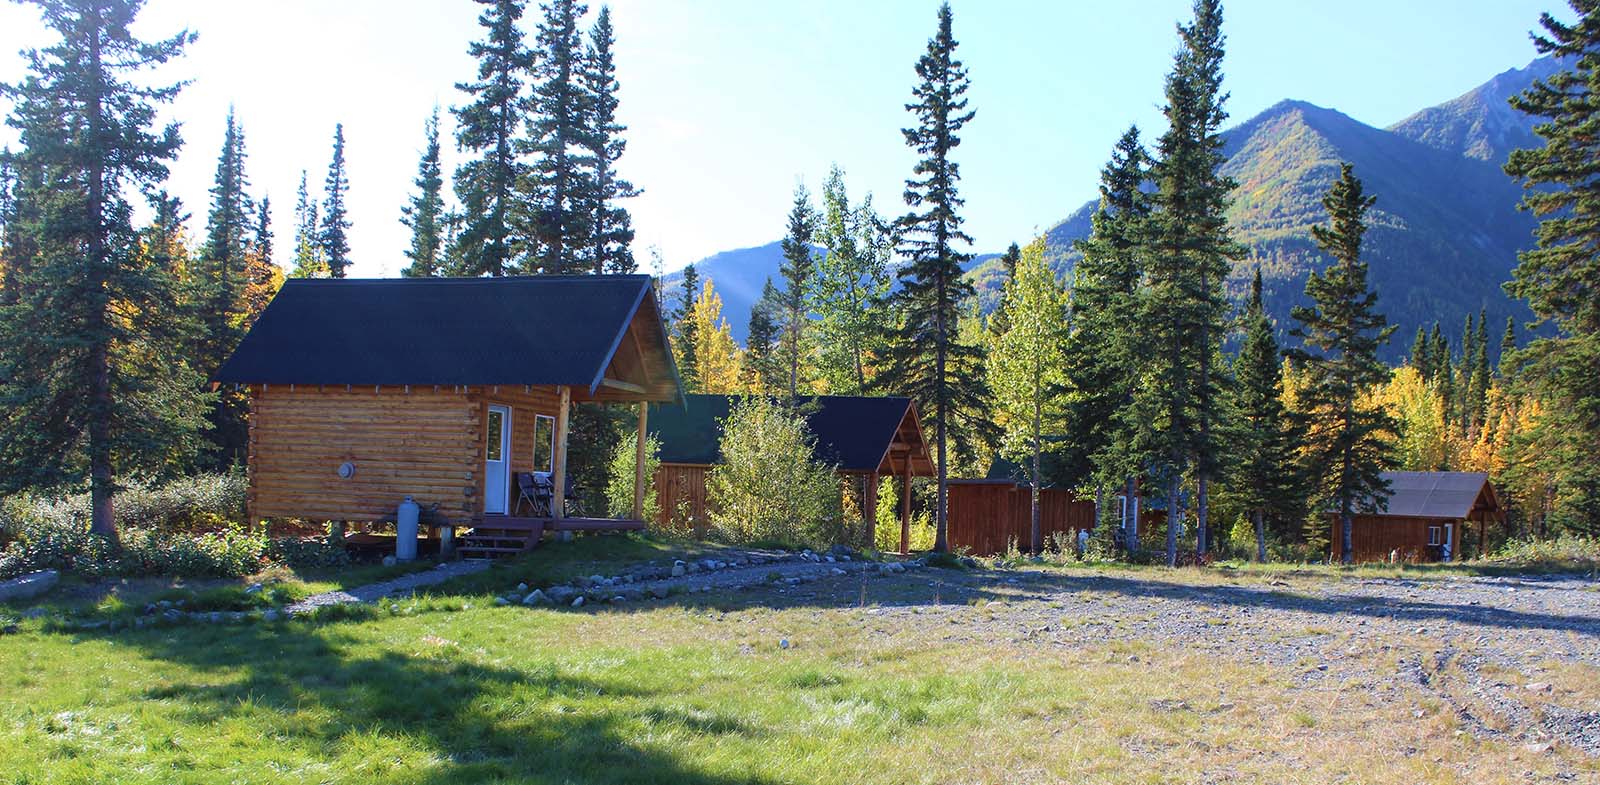 Kennecott River Lodge Cabins and Grounds - Explore McCarthy